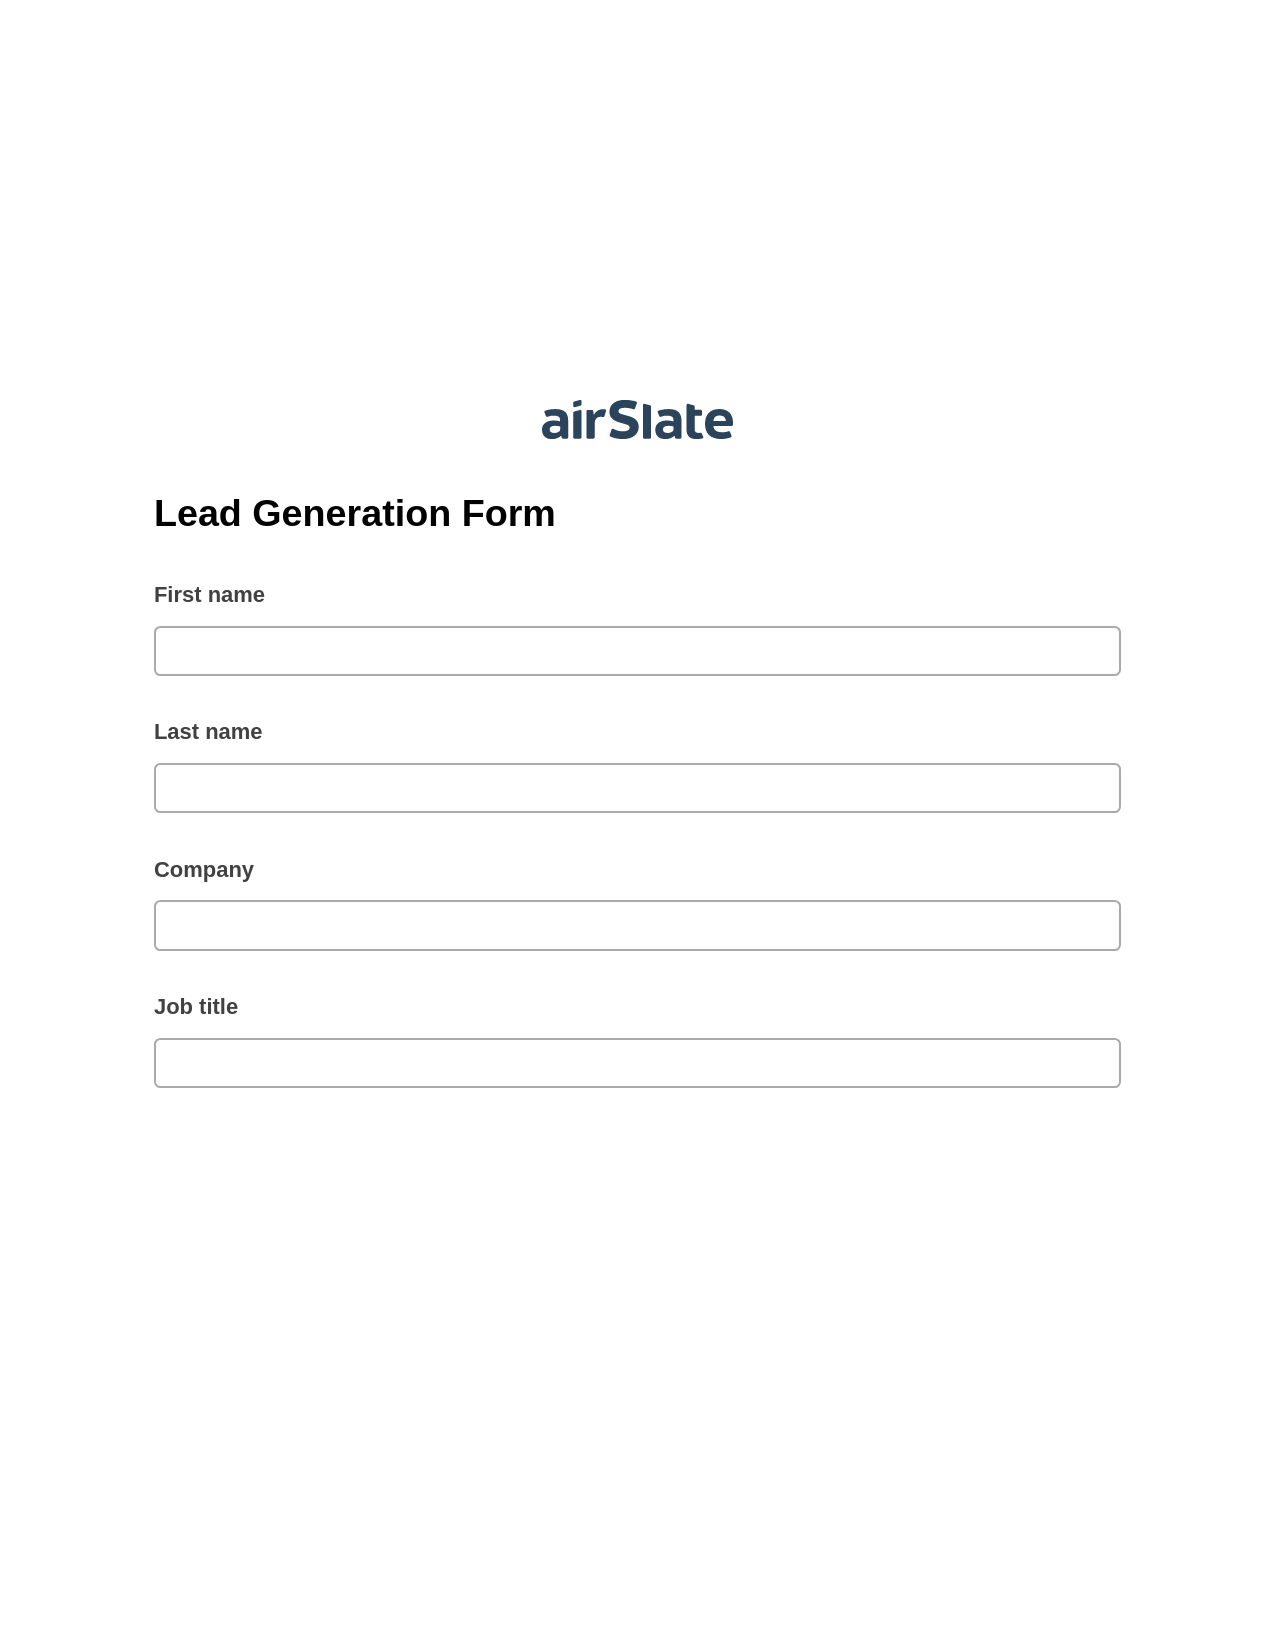 Multirole Lead Generation Form Pre-fill Dropdowns from Google Sheet Bot, Send a Slate with Roles Bot, Archive to Google Drive Bot